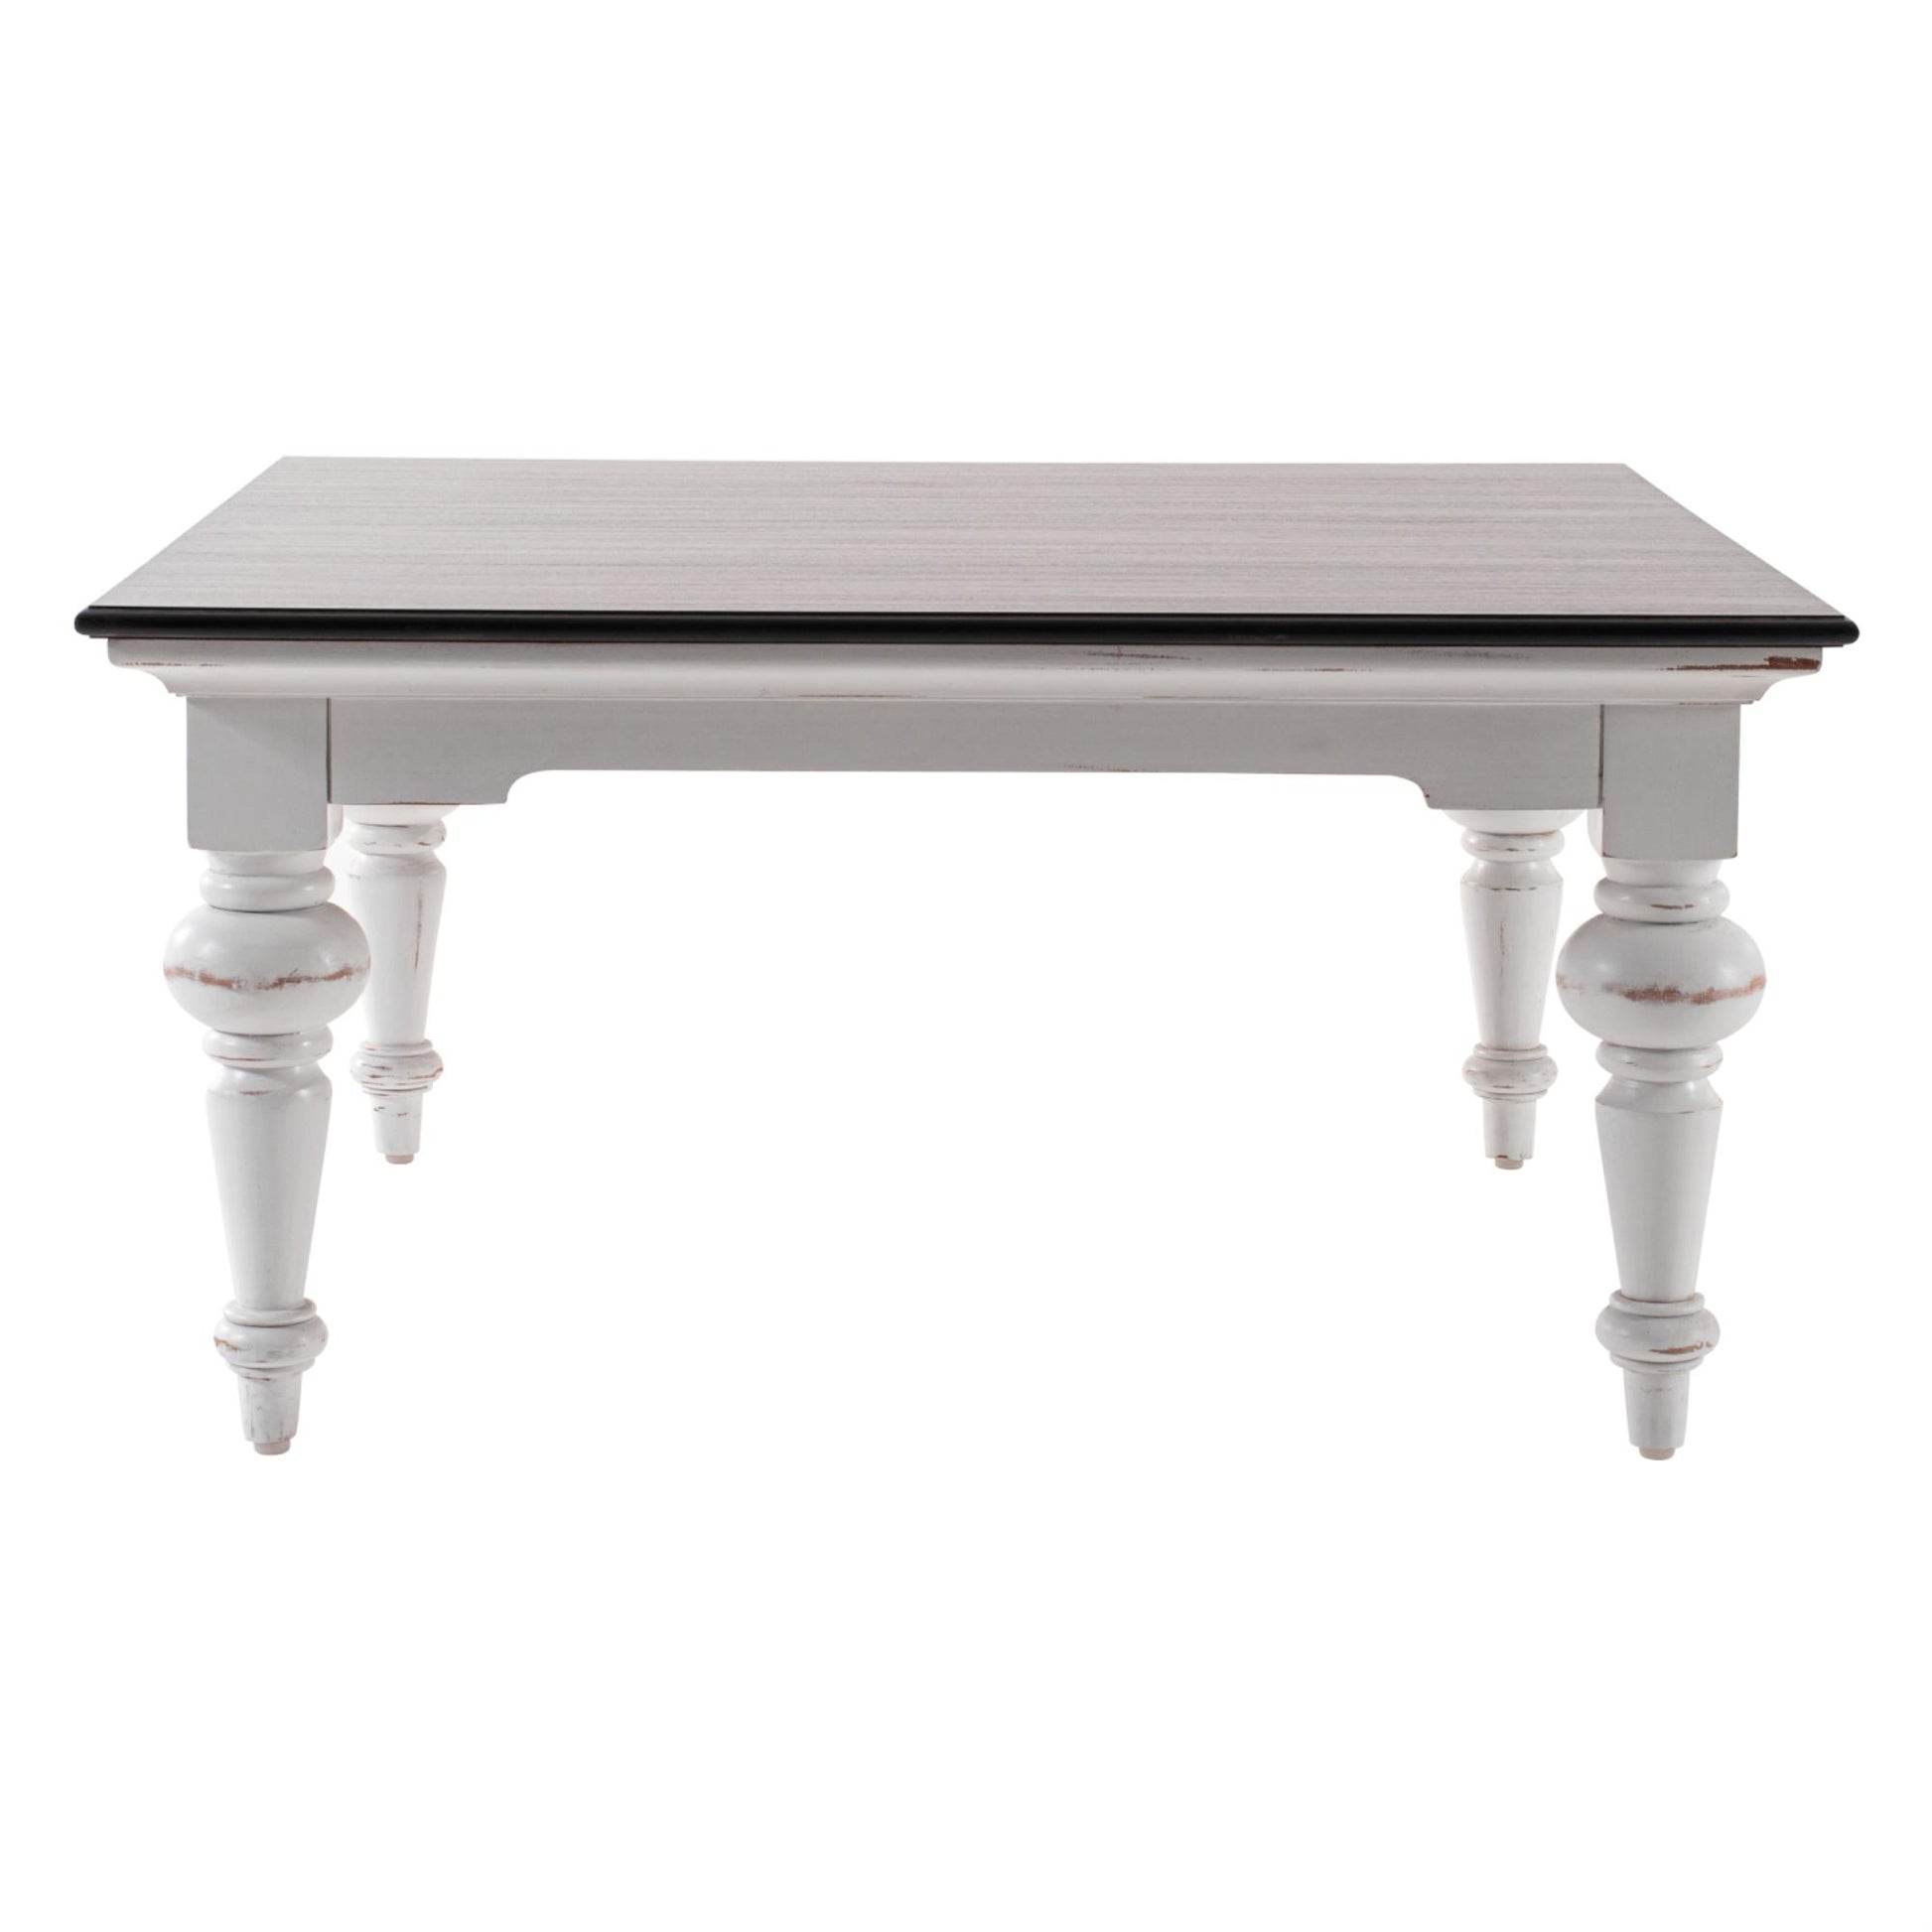 Provence Accent collection by Nova Solo.  Square Coffee Table CasaFenix